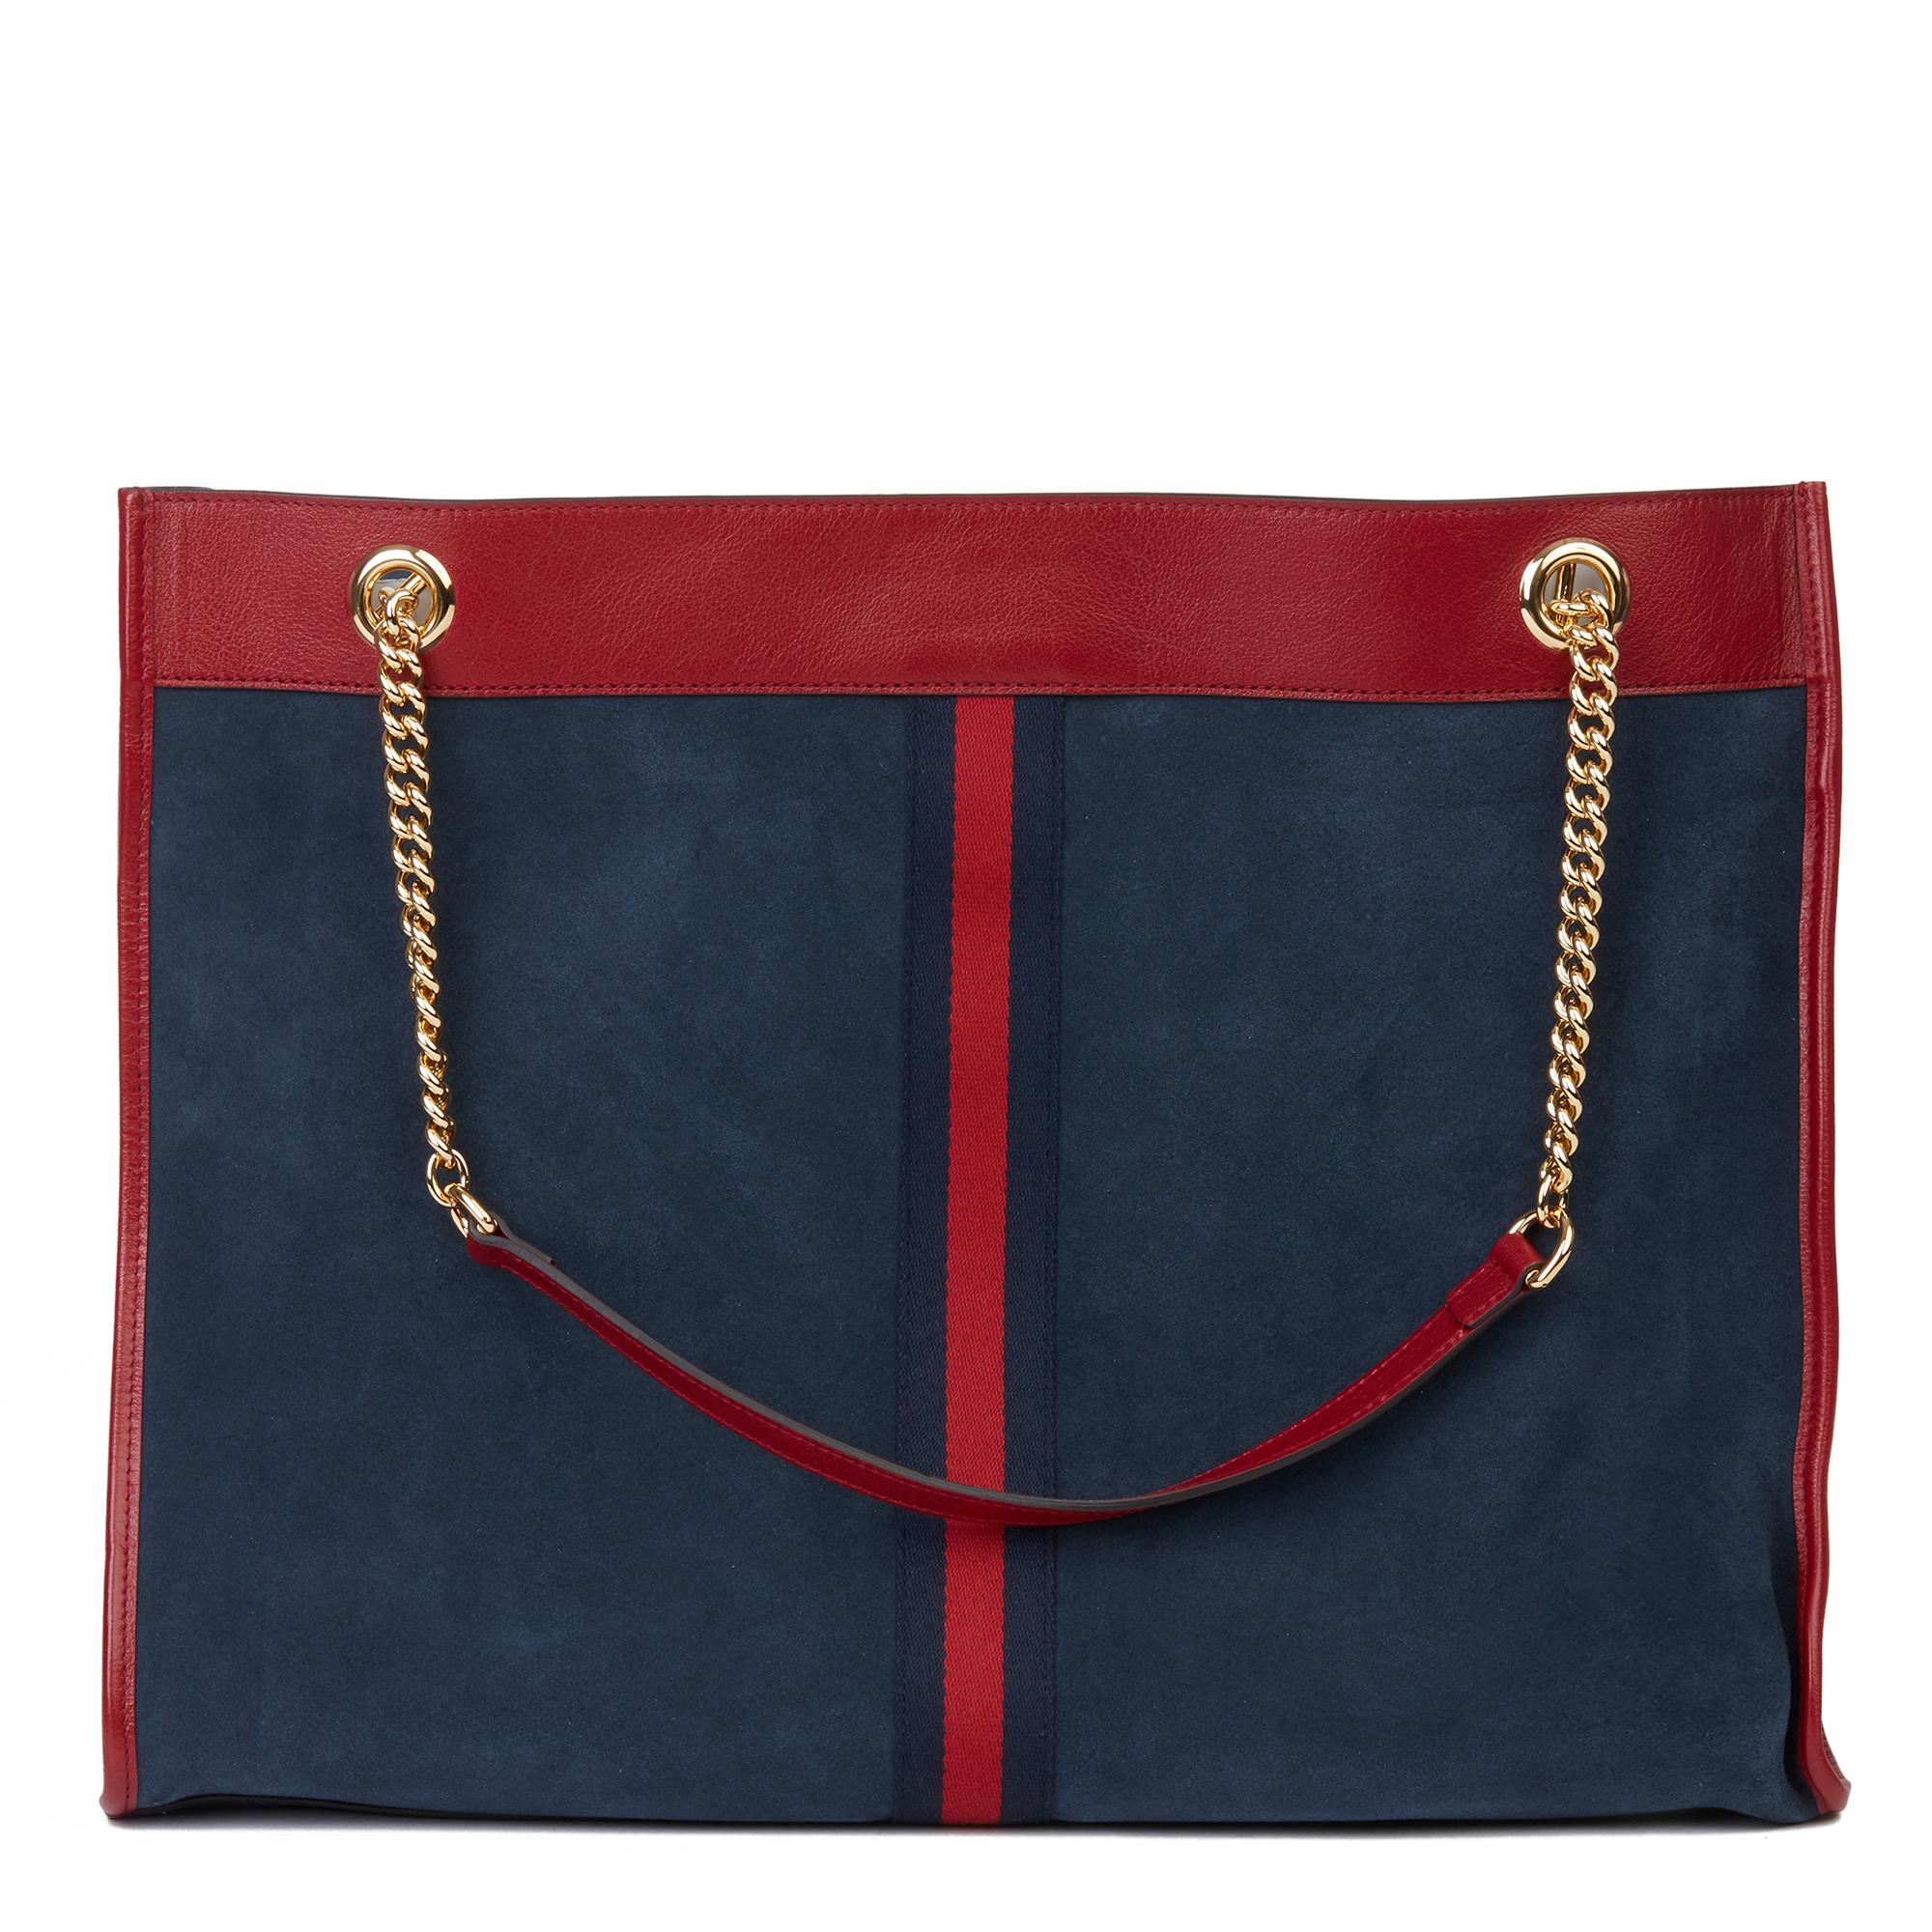 2020 Gucci Red Aged Calfskin Leather & Blue Suede Web Large Rajah Tote 1